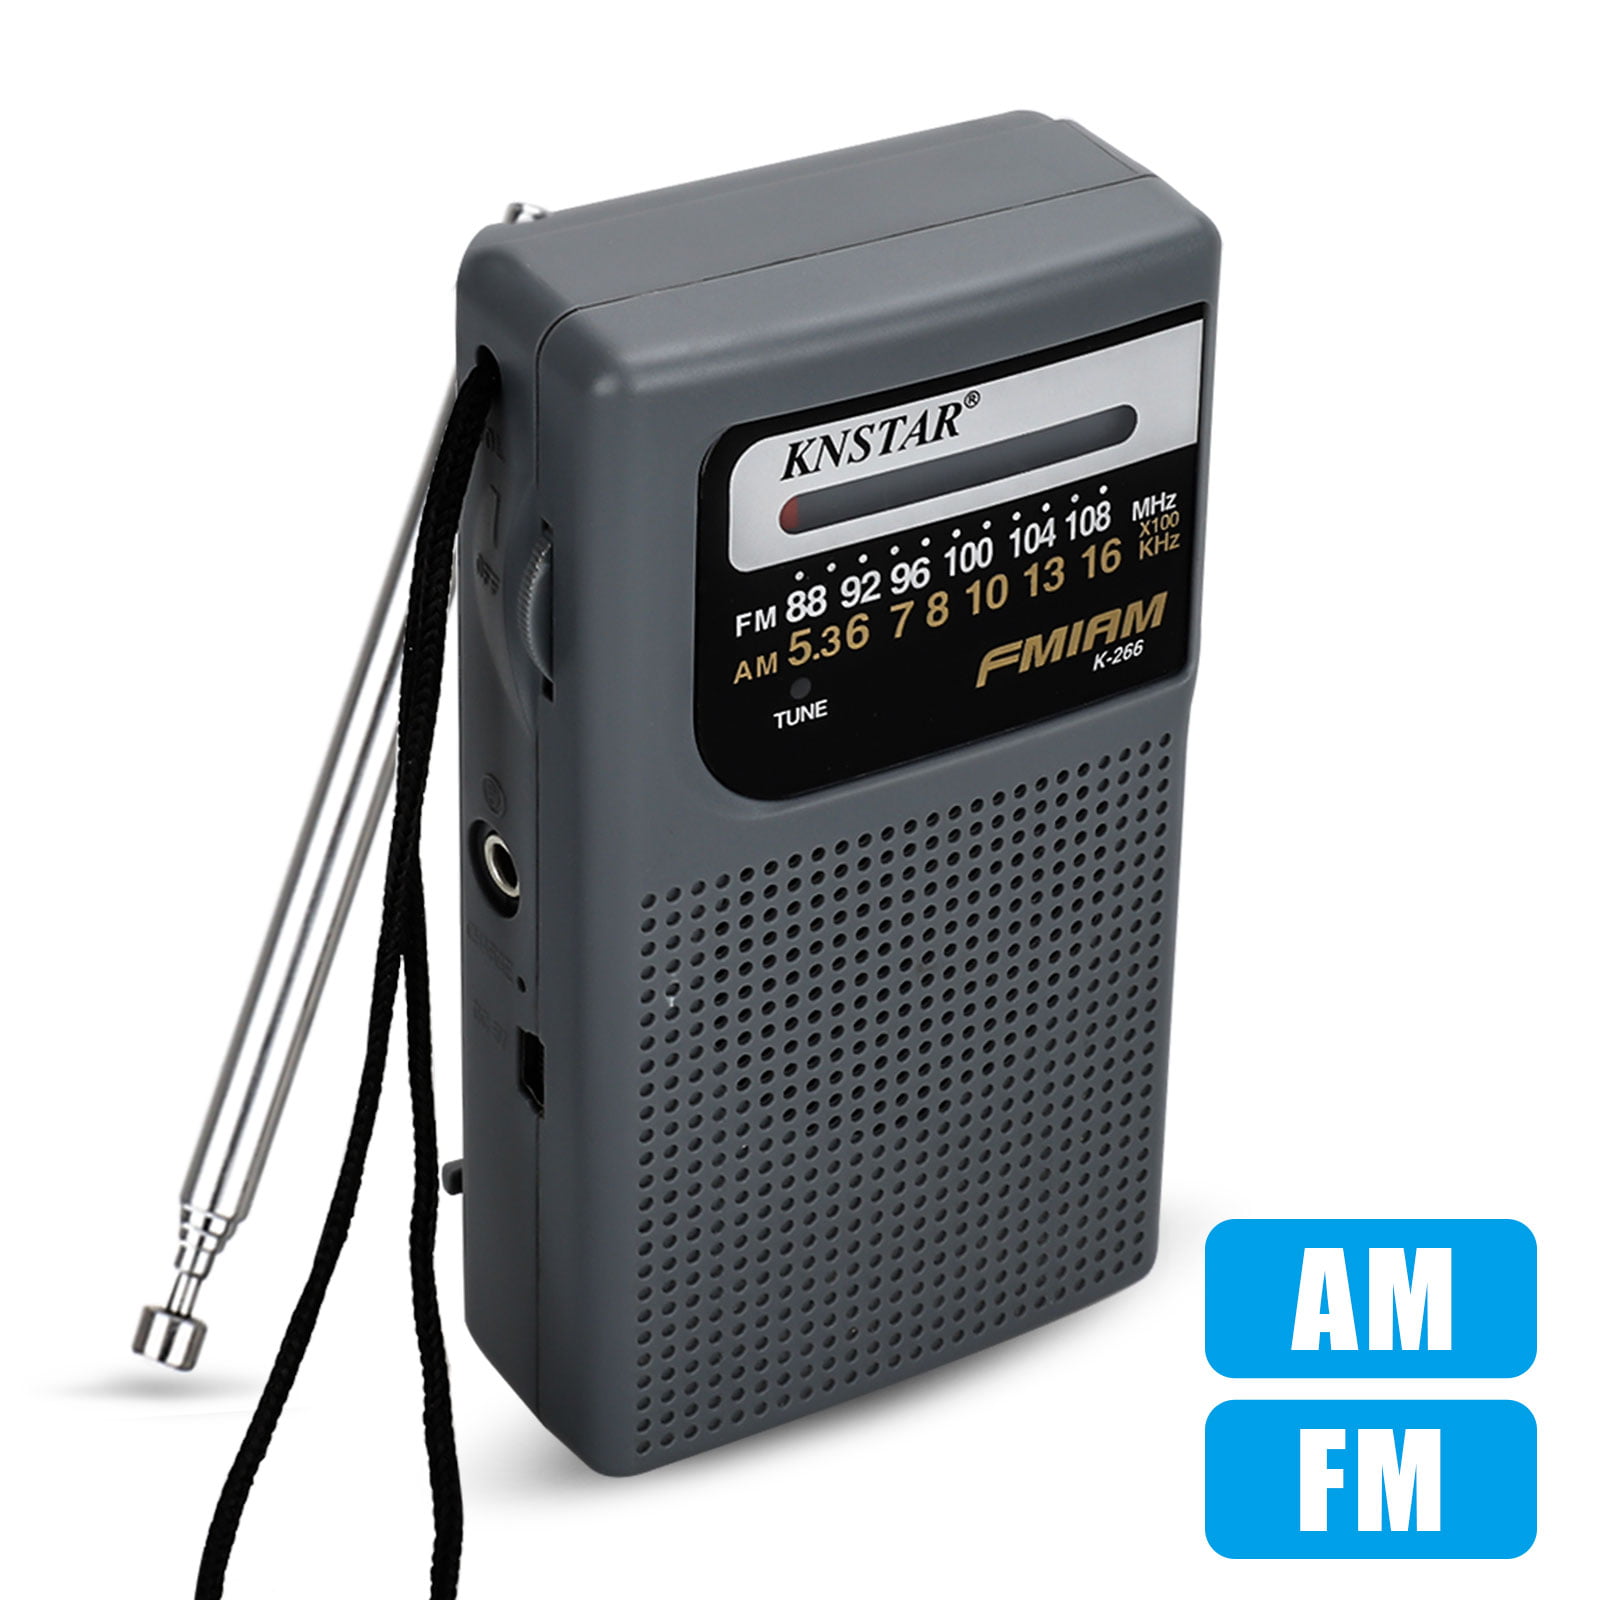 Portable Radio Pocket AM/FM Transistor Radio-Battery Powered with Earphone Jack for Walking Hiking Camping 